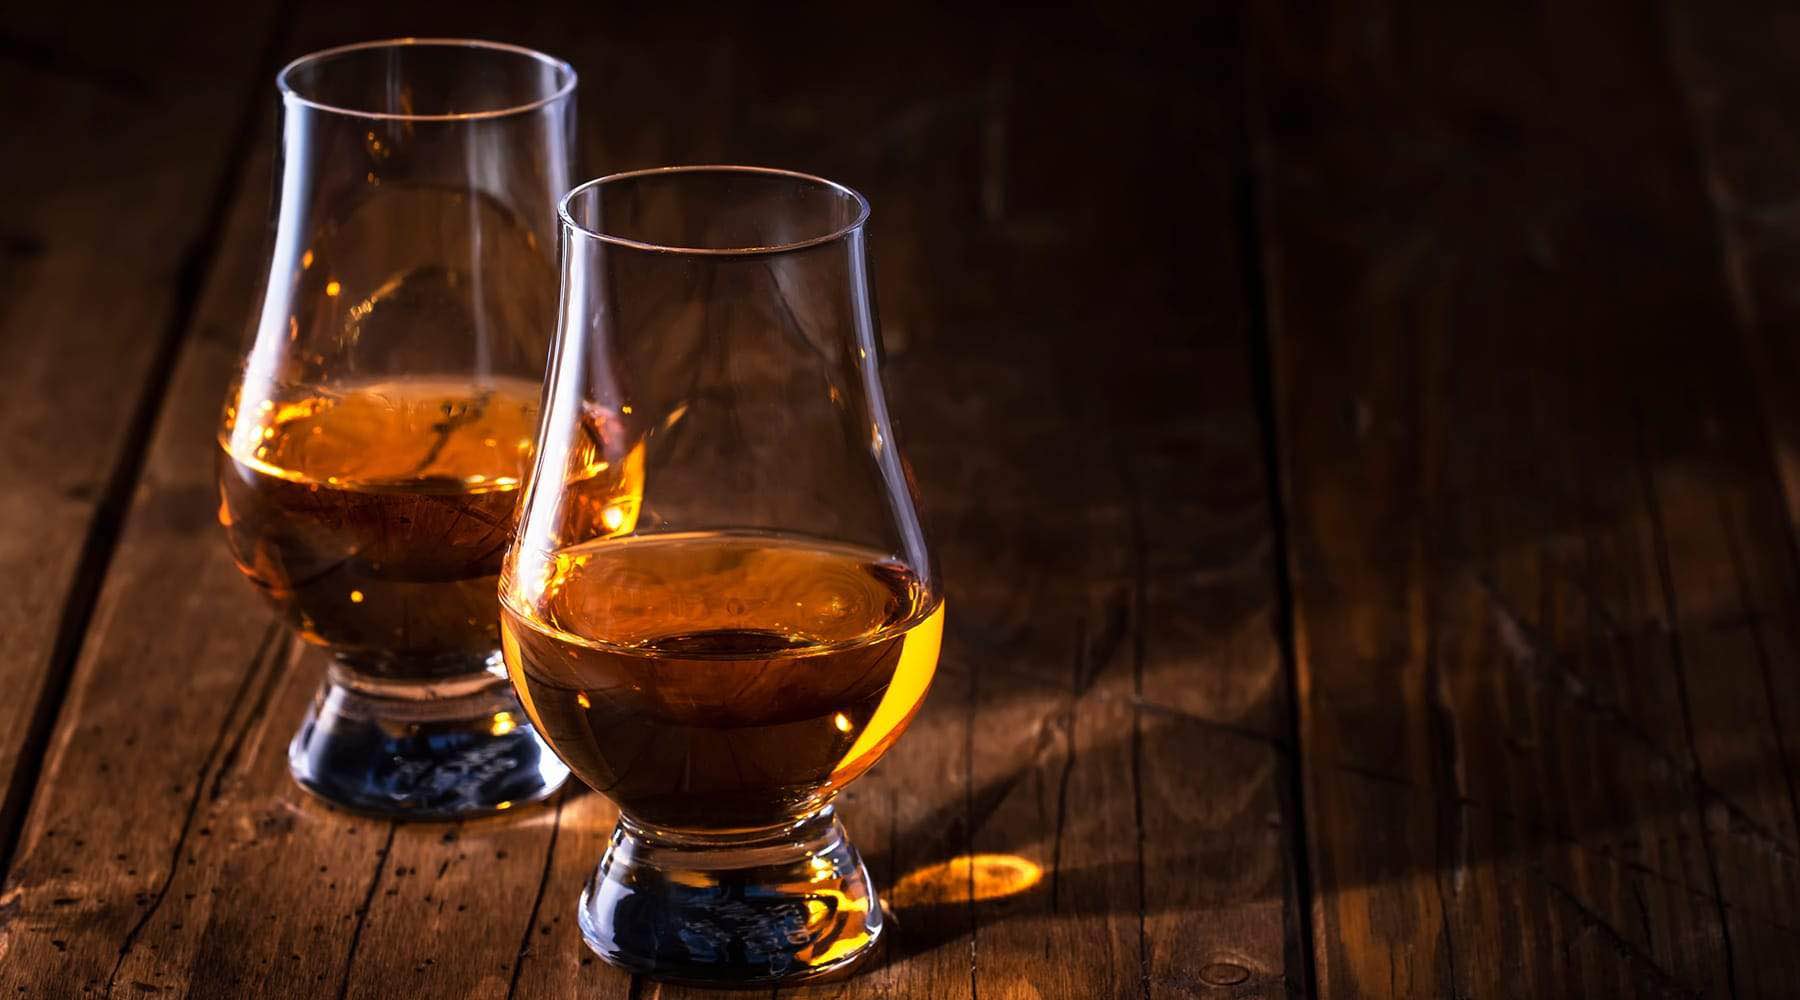 What key ingredients is whisky or whiskey made from?